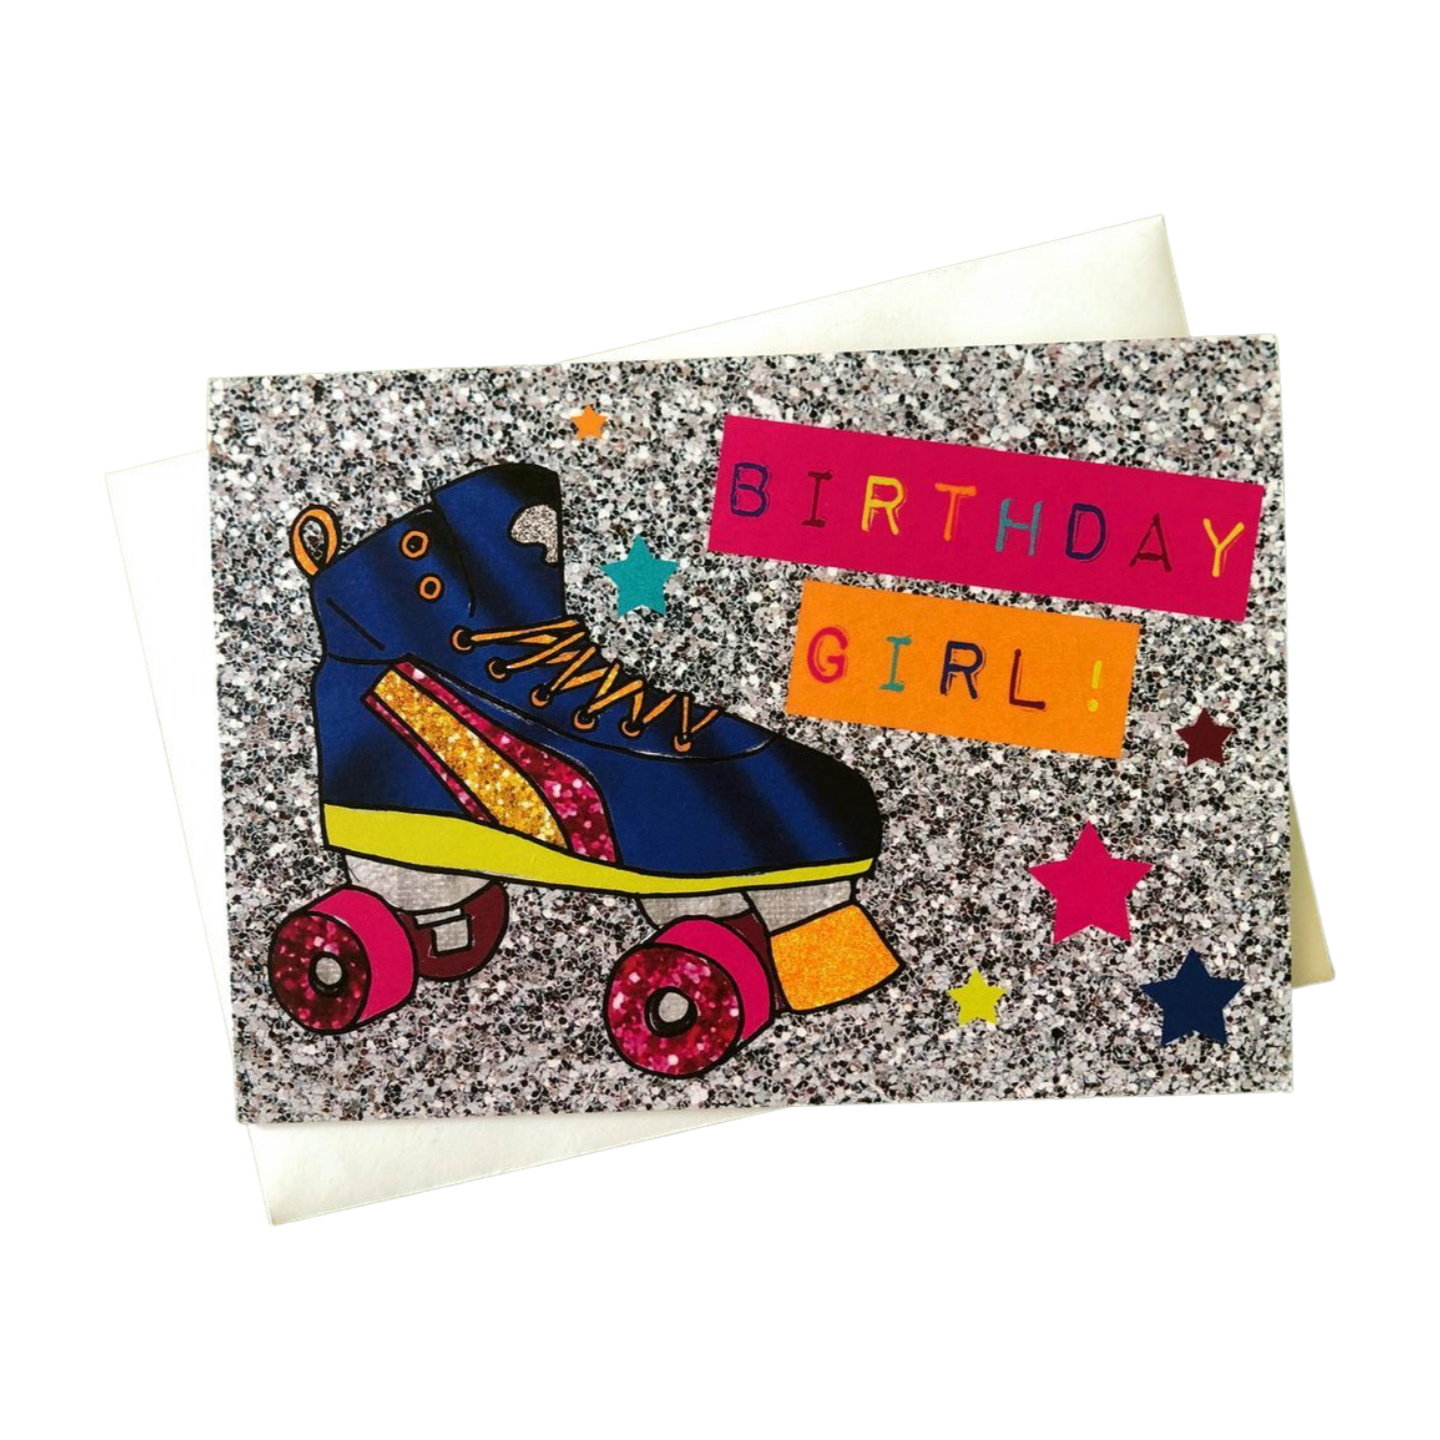 Neon and glitter rollerboot birthday girl card on a white background.